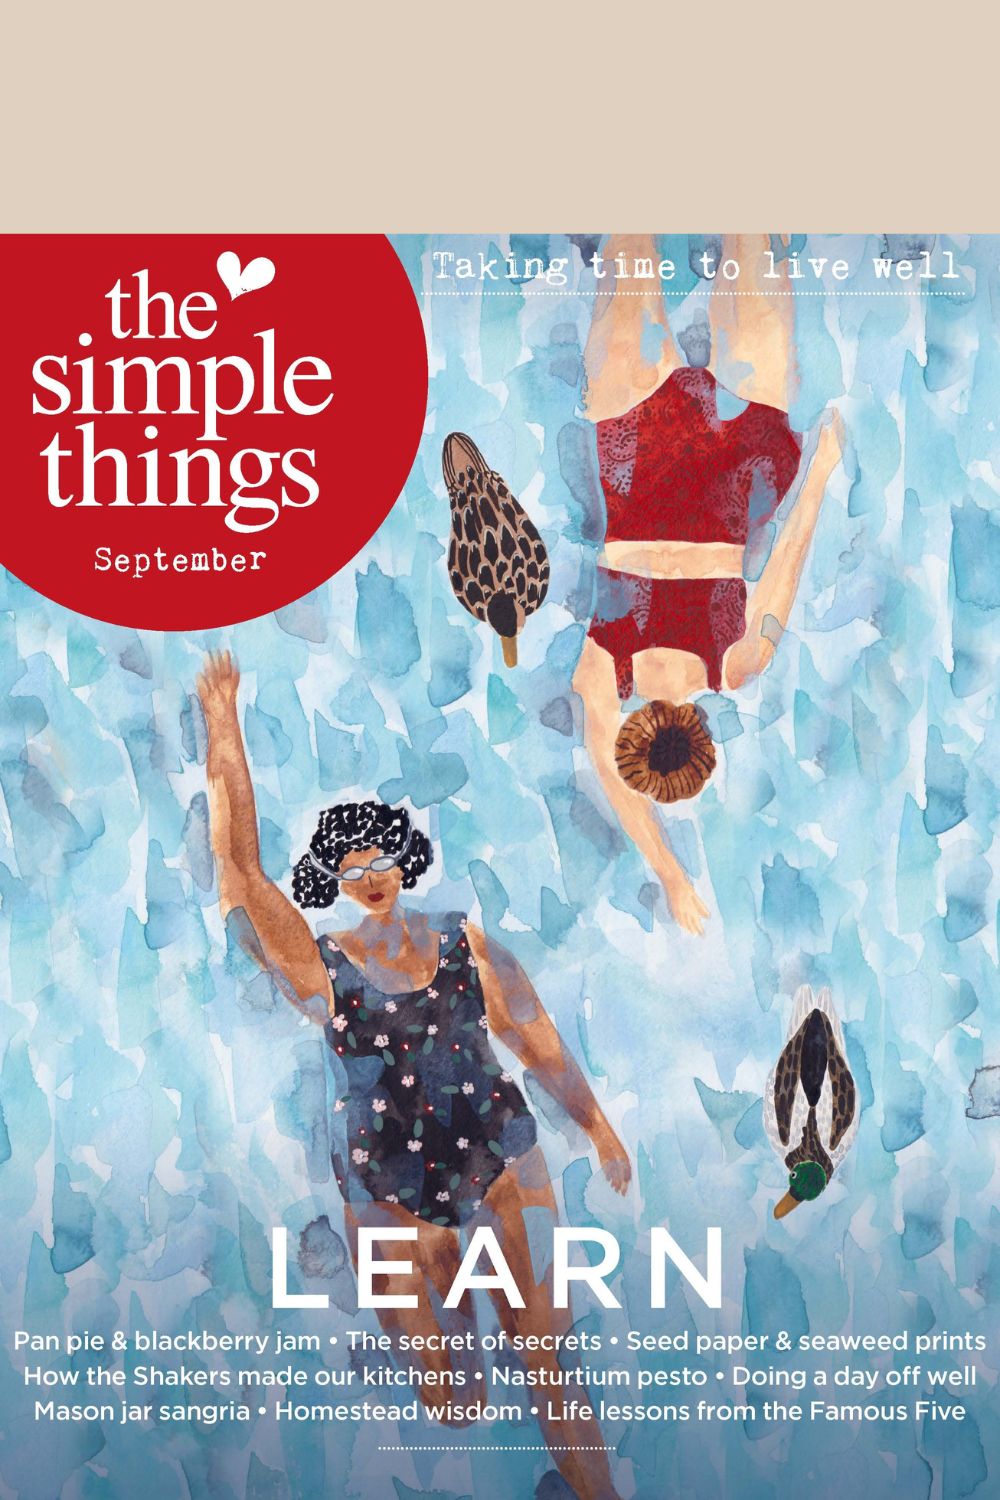 The Simple Things Magazine Issue 123 cover